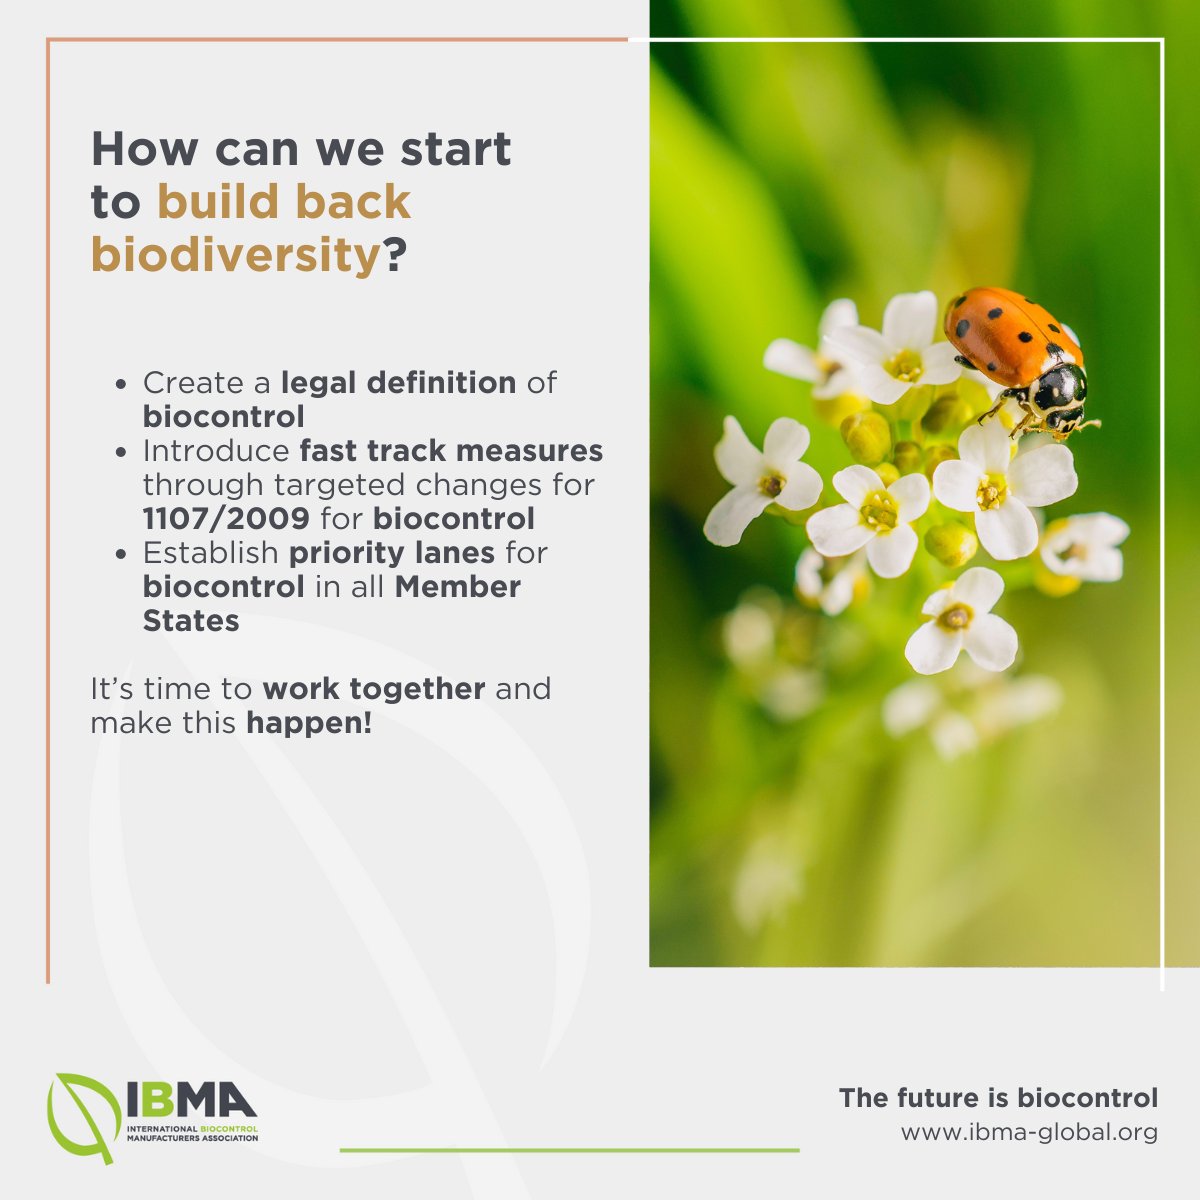 🌱🐞Happy International #BiodiversityDay! This year’s theme is 'Be Part of the Plan.' As farmers urge policymakers to speed up access to #Biocontrol, we’re asking: Can Europe’s #Biodiversity, farmers and #FoodSecurity wait another decade? 
Read more here: linkedin.com/pulse/why-euro…